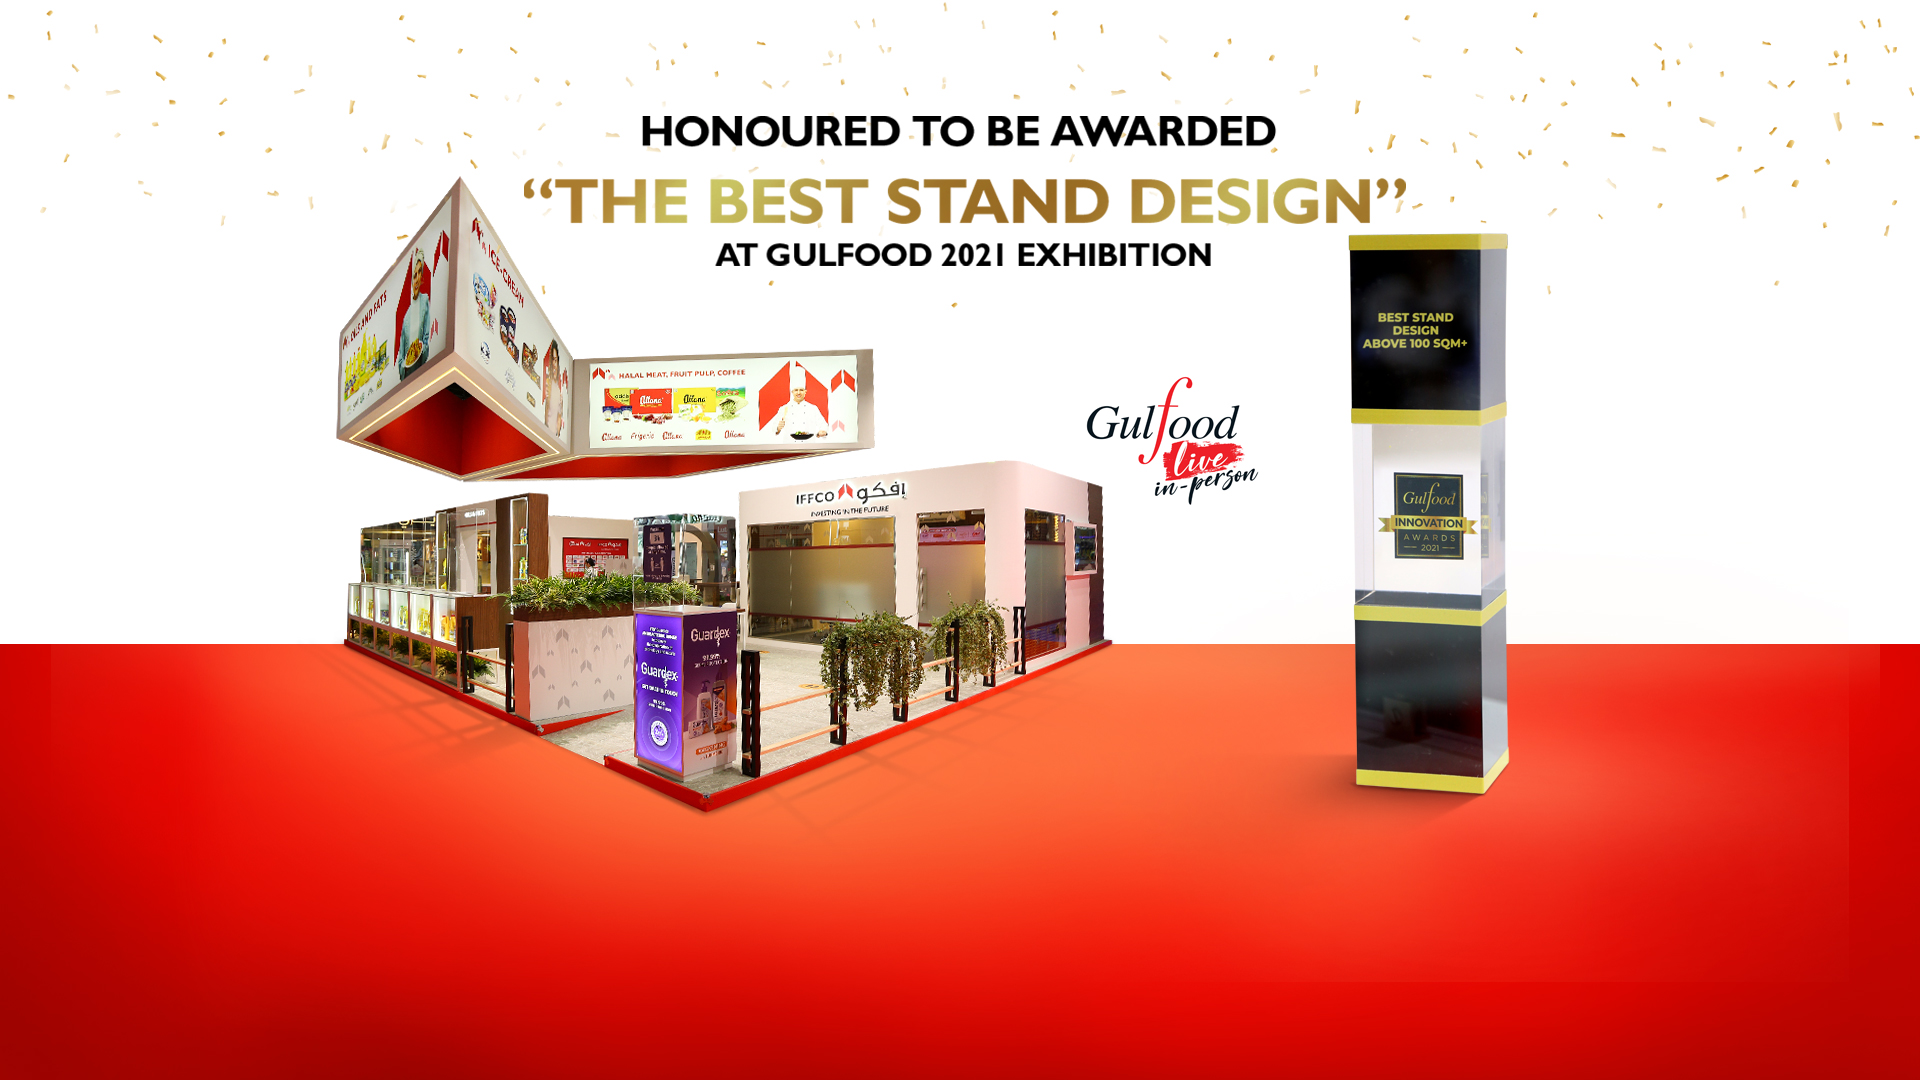 IFFCO honoured with the ‘Best Stand Award’ at the Gulfood 2021 Exhibition